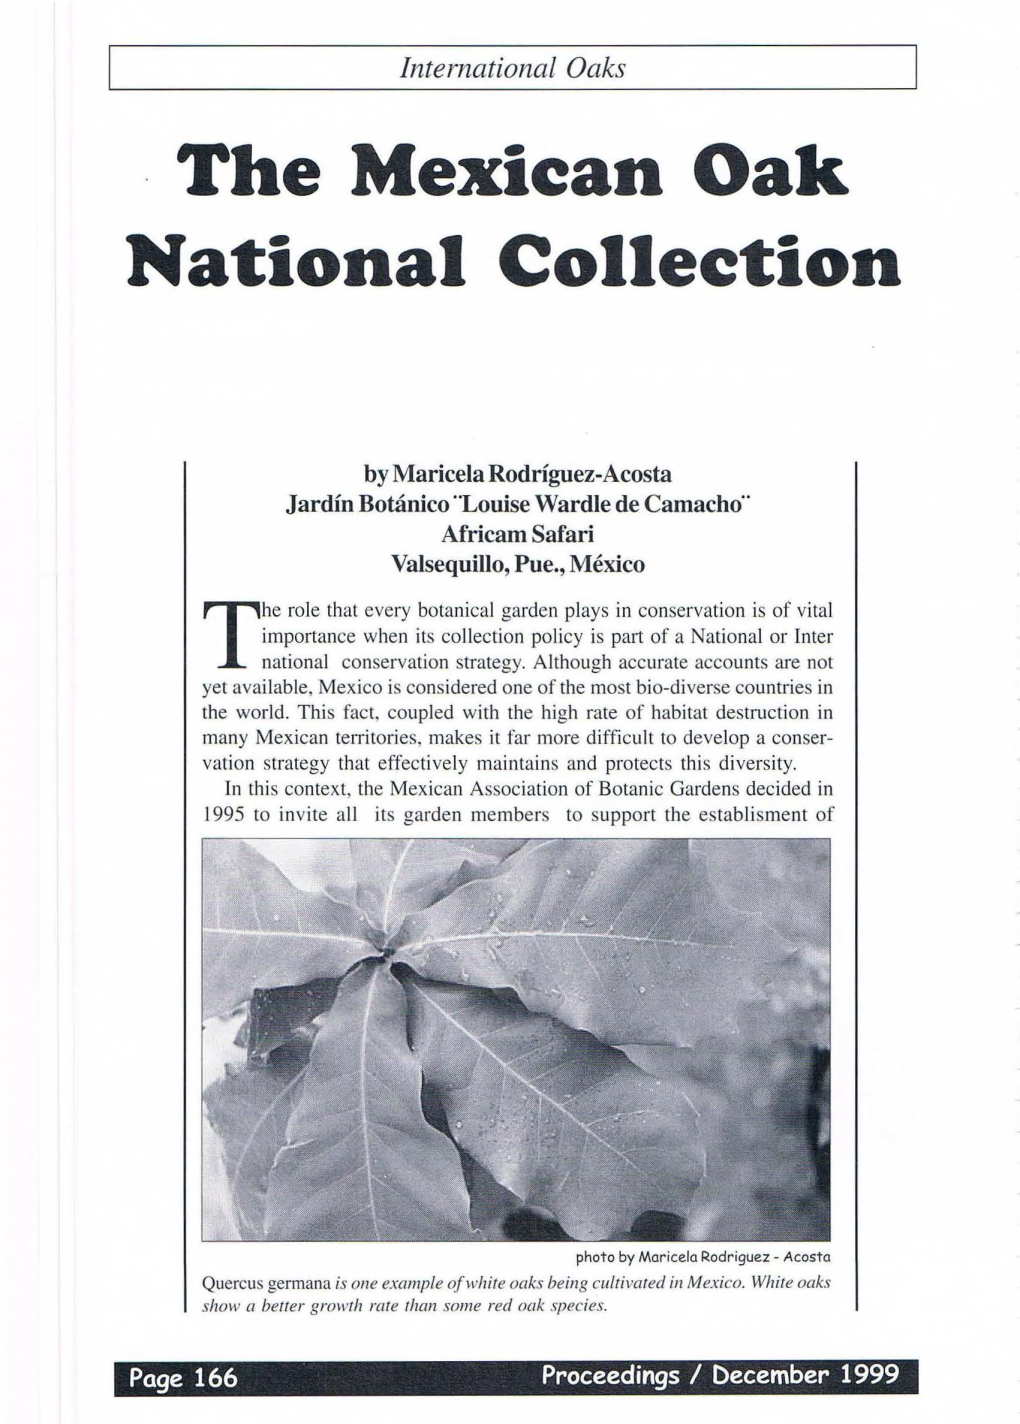 The Mexican Oak National Collection